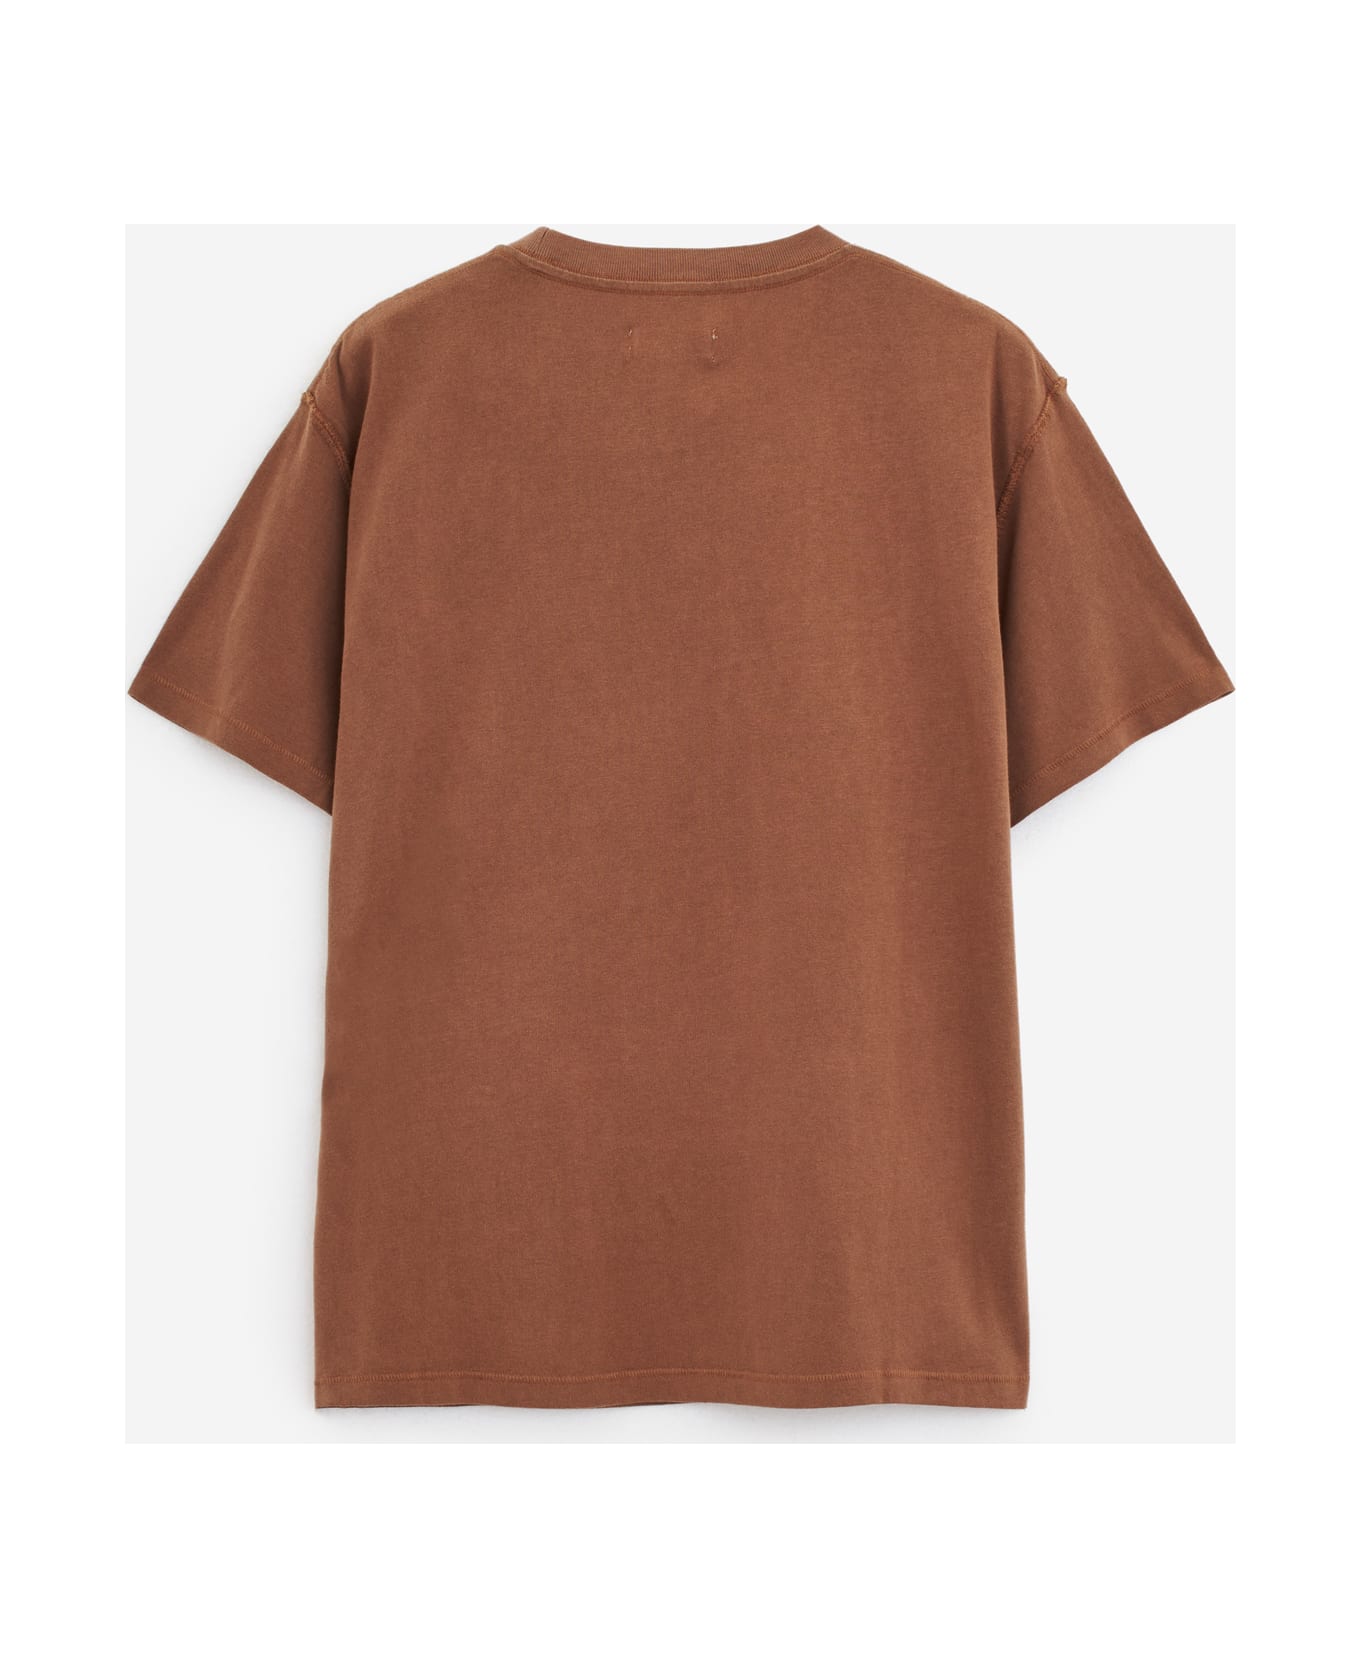 ERL Ripped Collar Skull T-shirt - brown